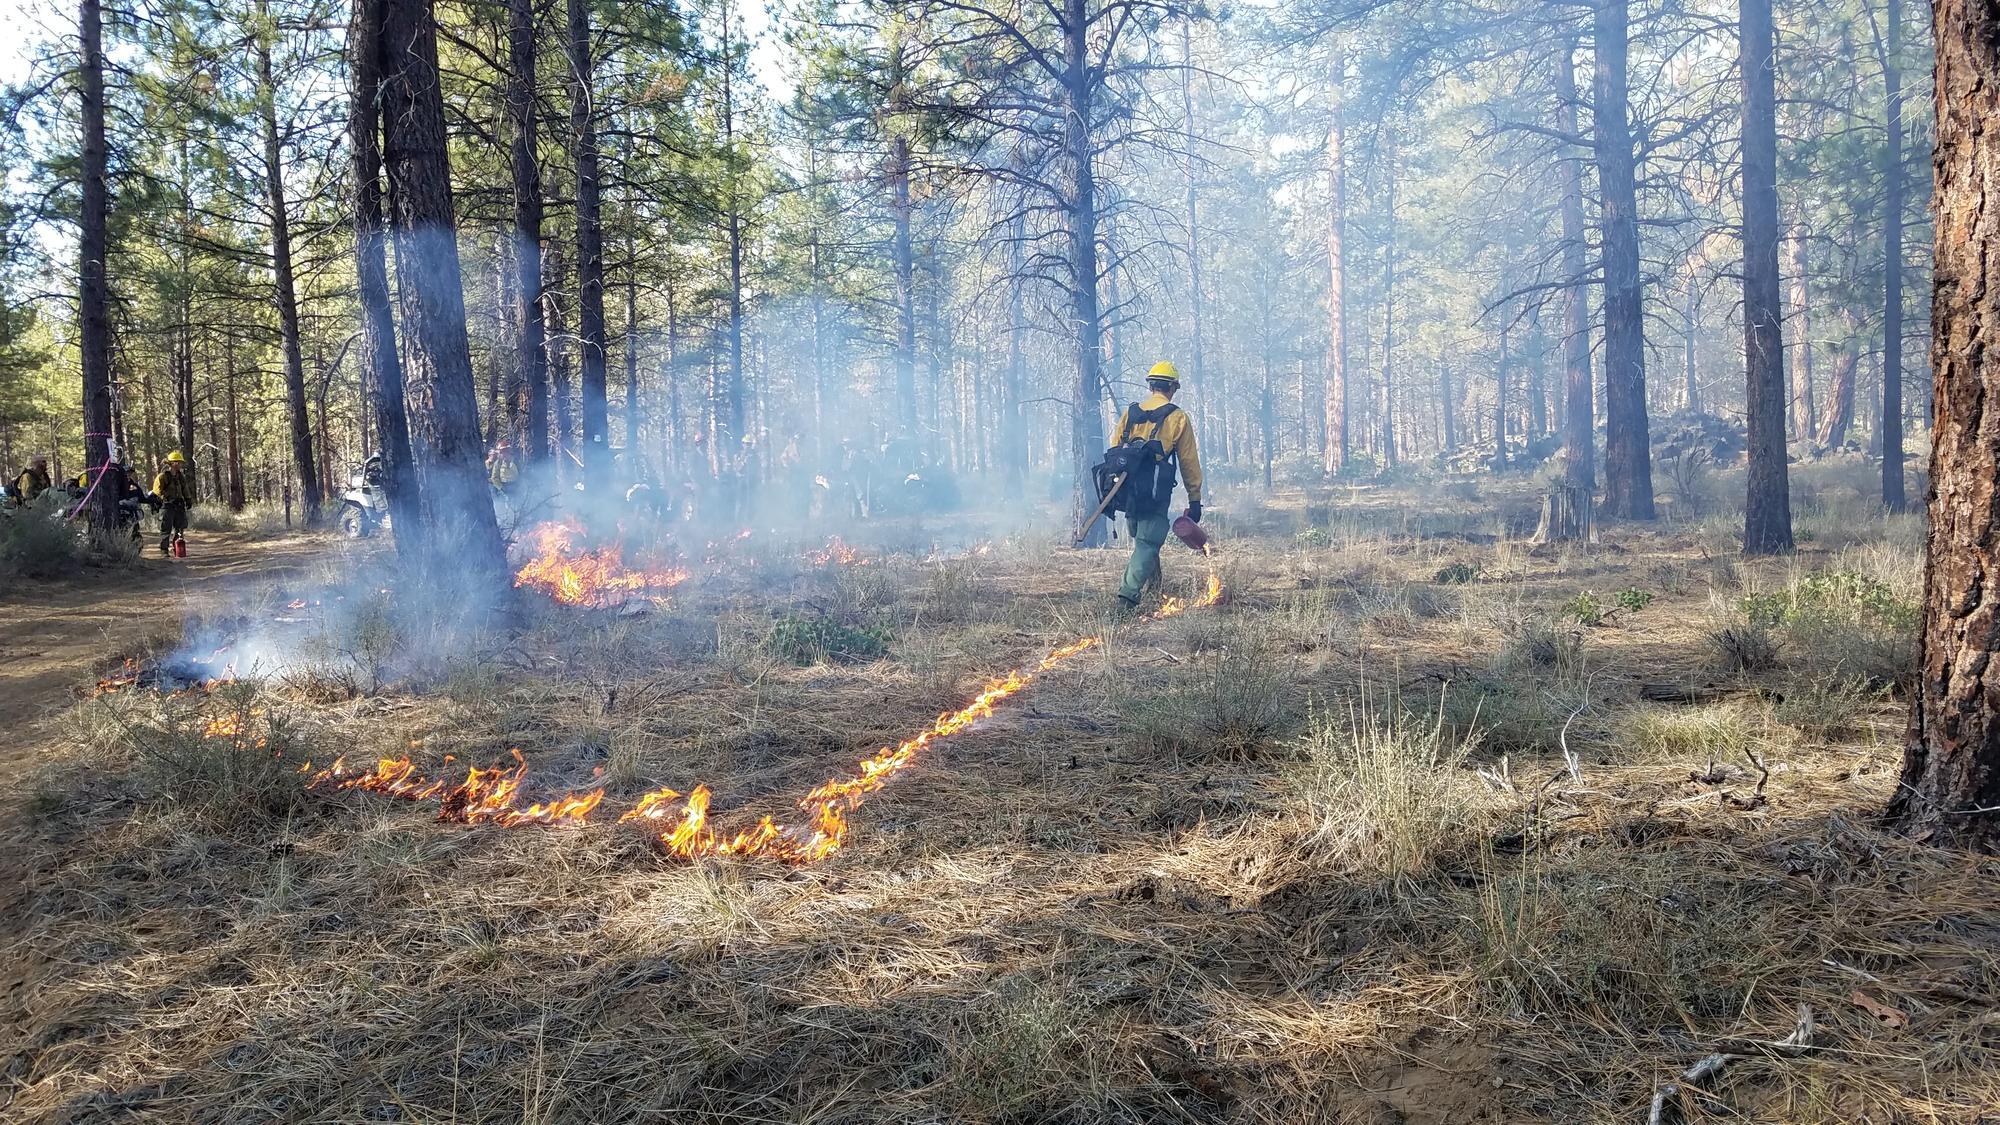 firefighter moves through smoky forest as flames lick ground in diamond pattern